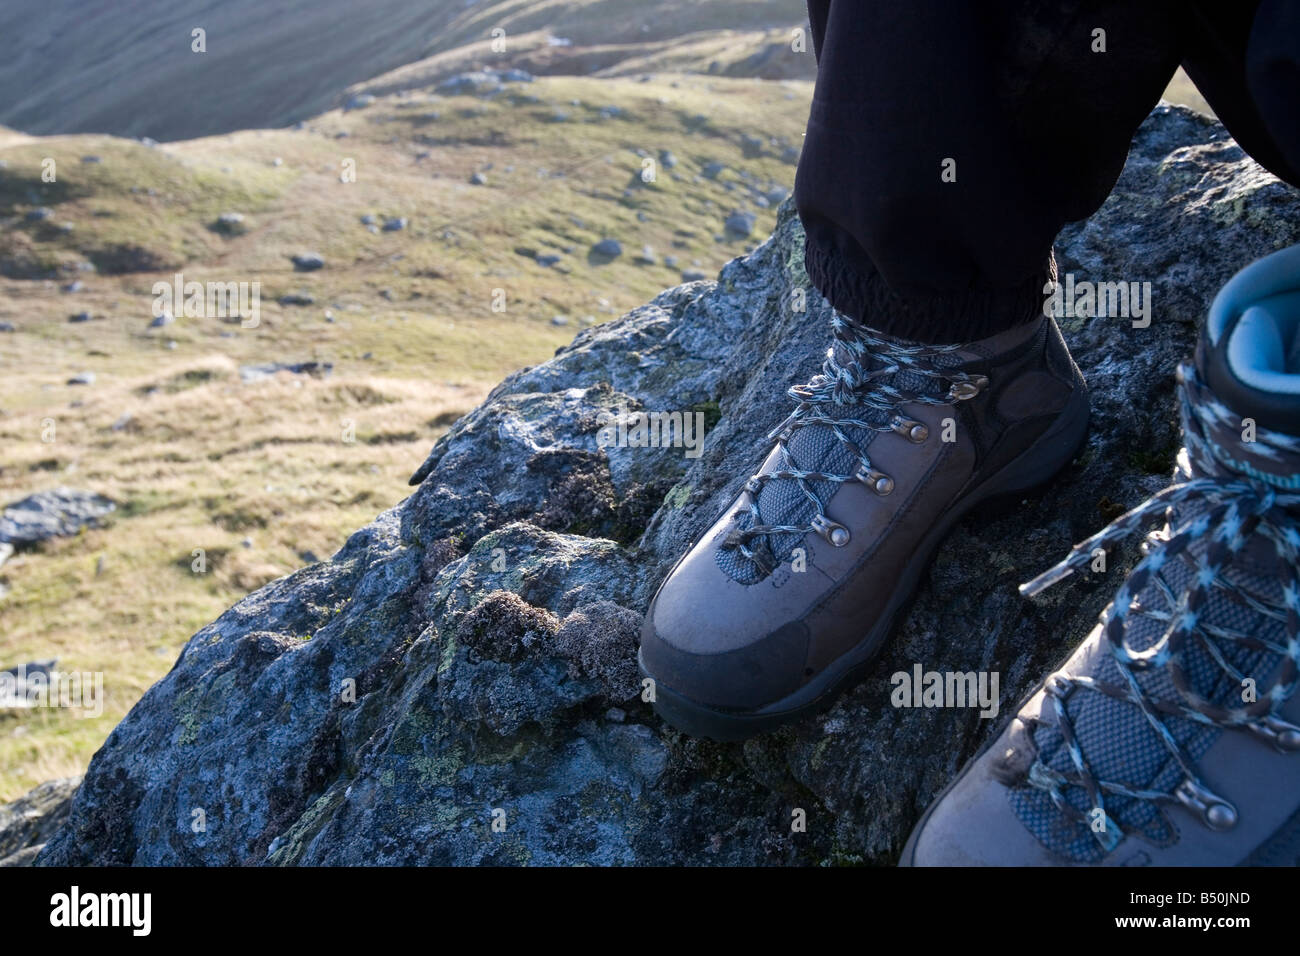 walking boots on a rock with mountain landscape background Stock Photo